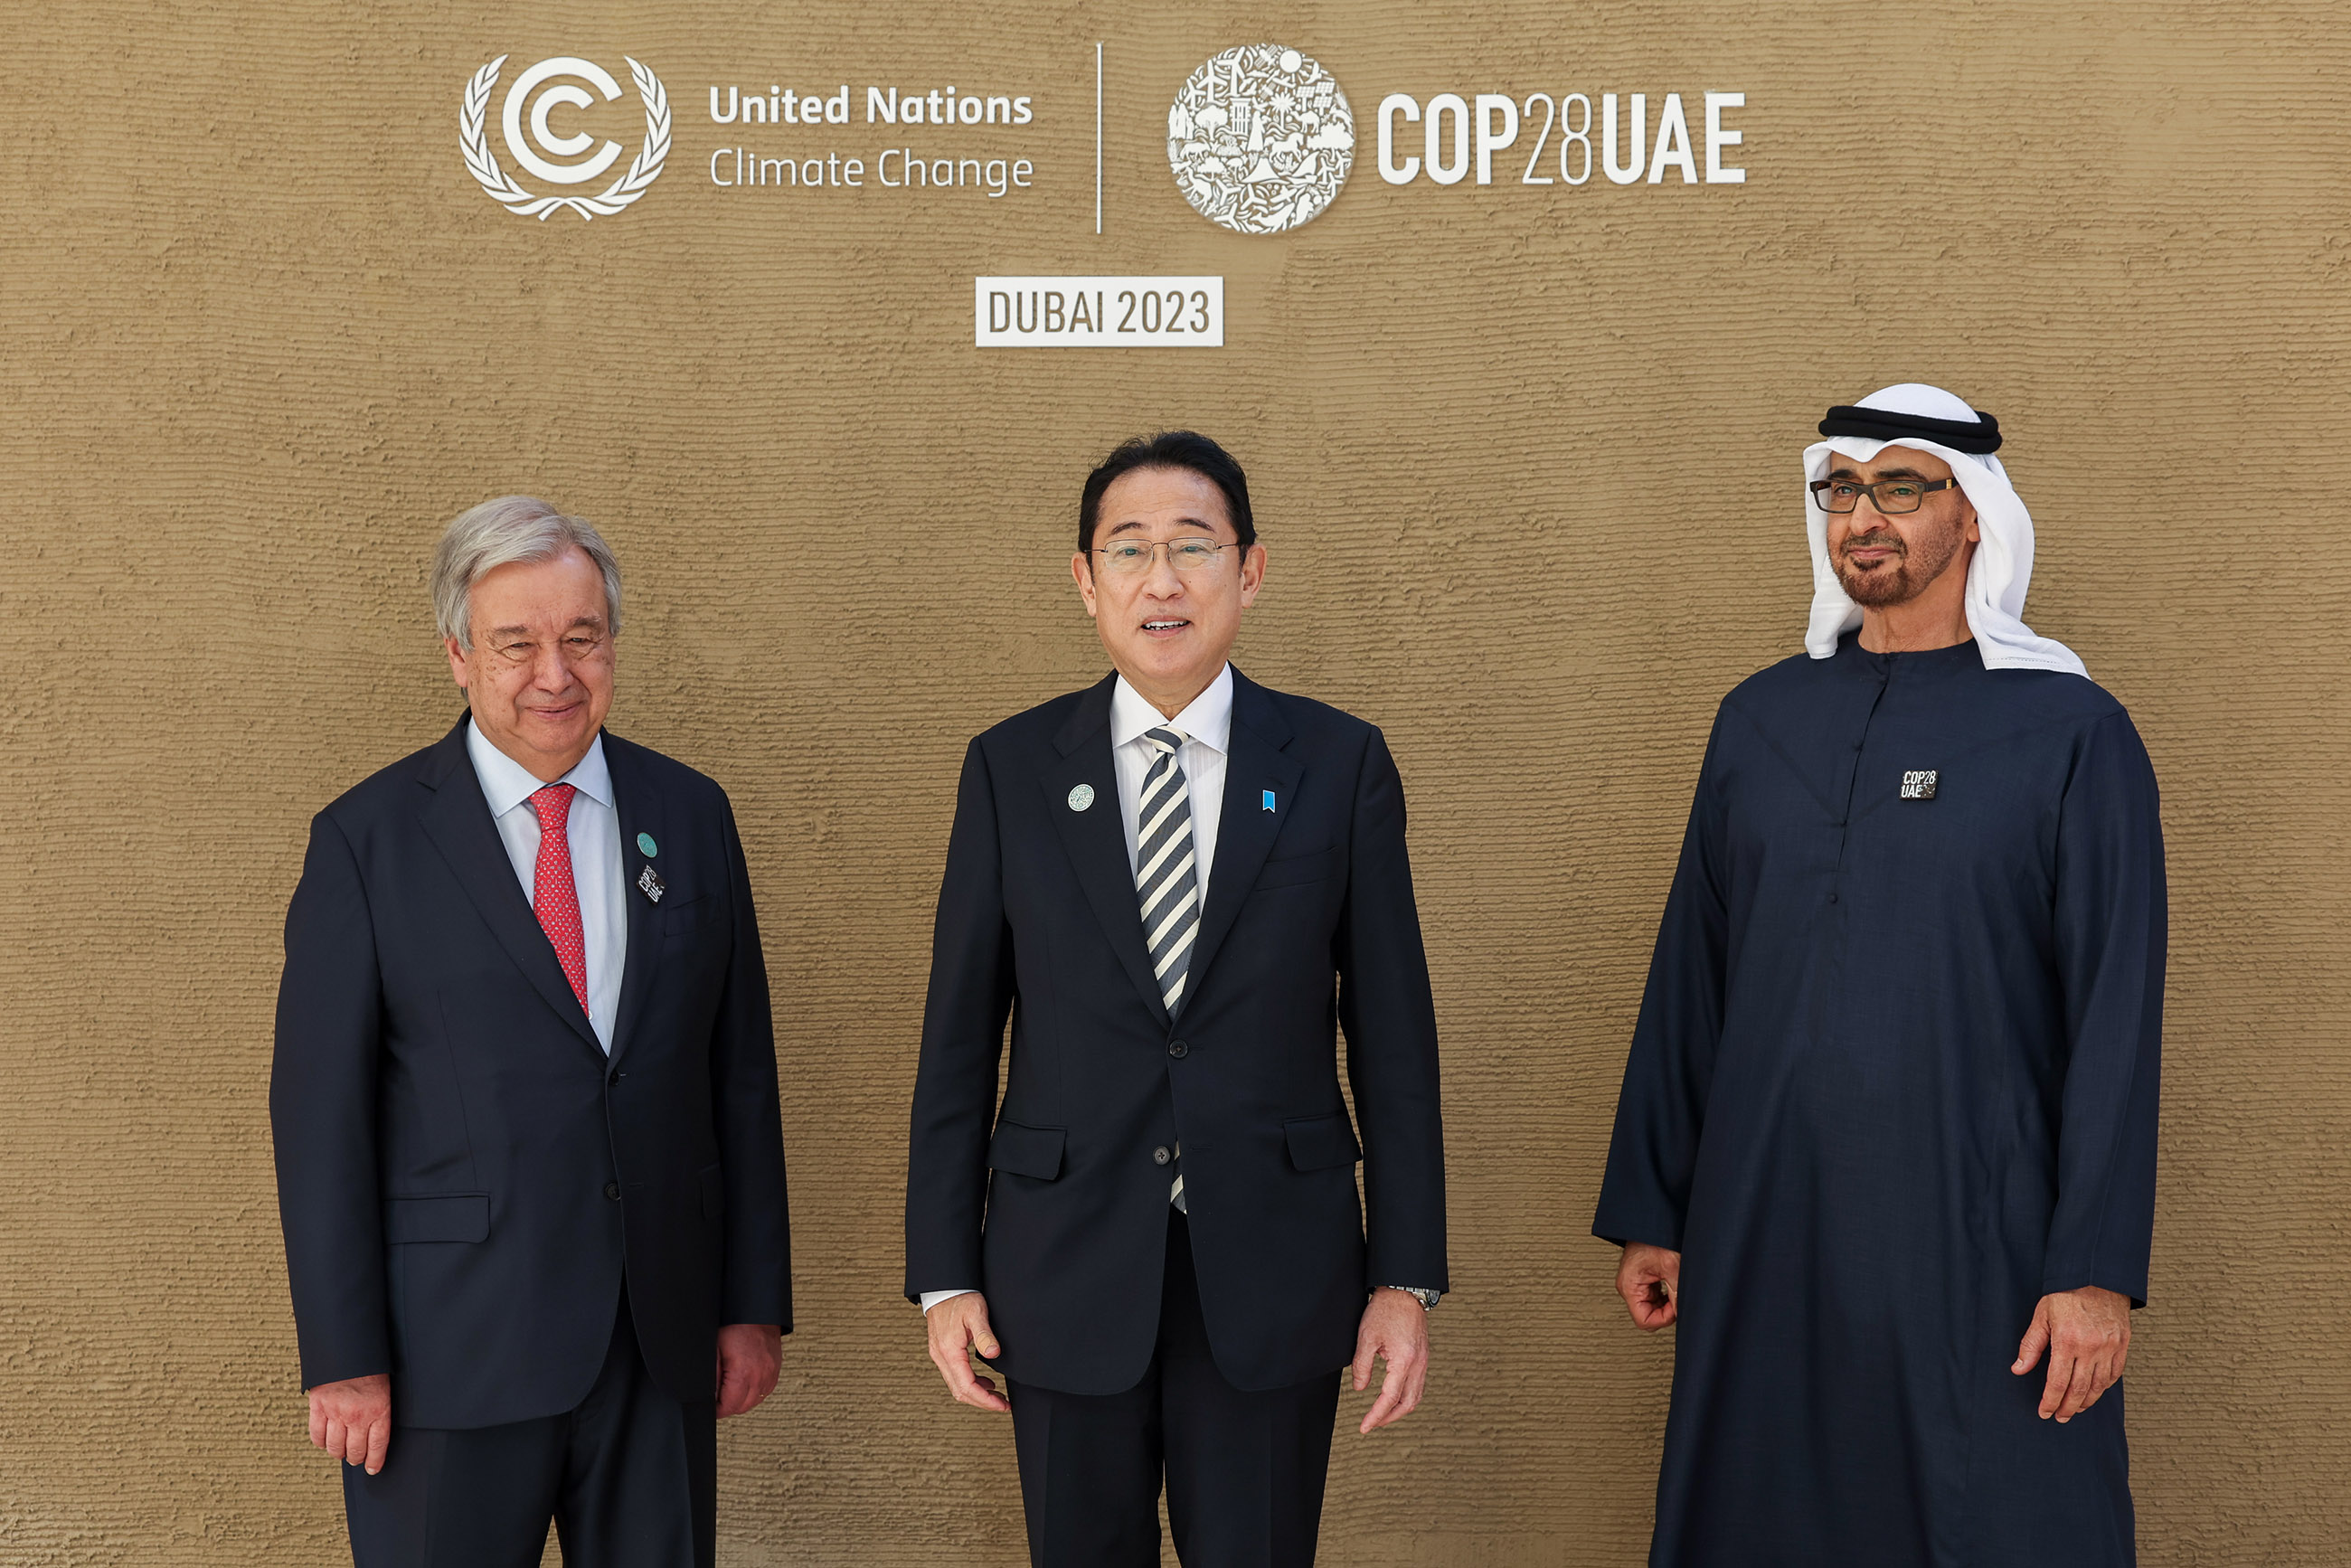 Prime Minister Kishida being welcomed at the venue (Photo by COP28/UNclimatechange)